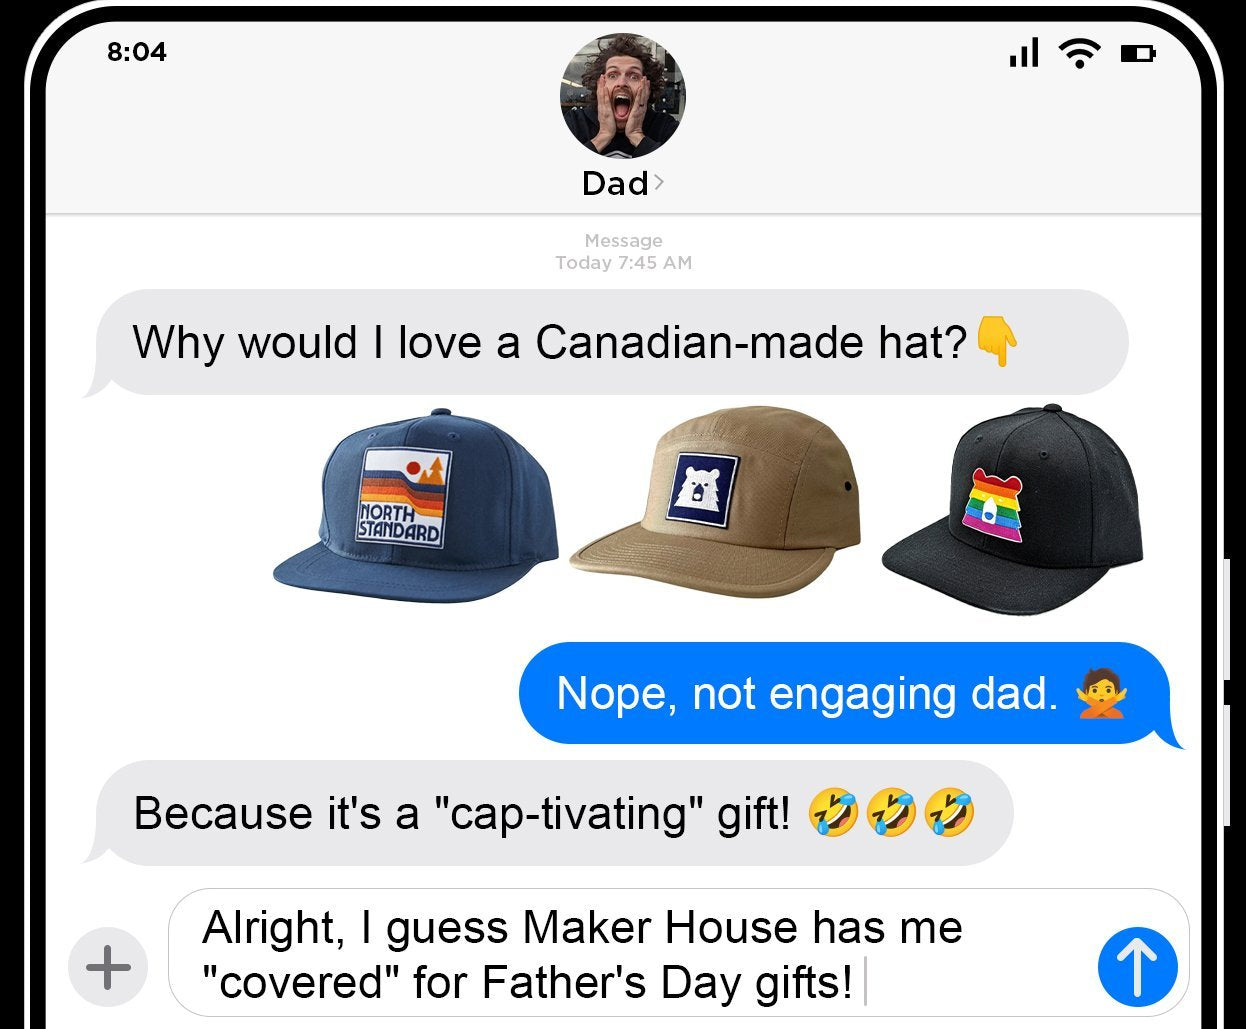 A text conversation: "Why did dad love his Canadian-made hat?" "Nope, not engaging." "Because it's a 'cap-tivating' gift!" "Alright, I guess Maker House has me 'covered' for Father's Day gifts!".